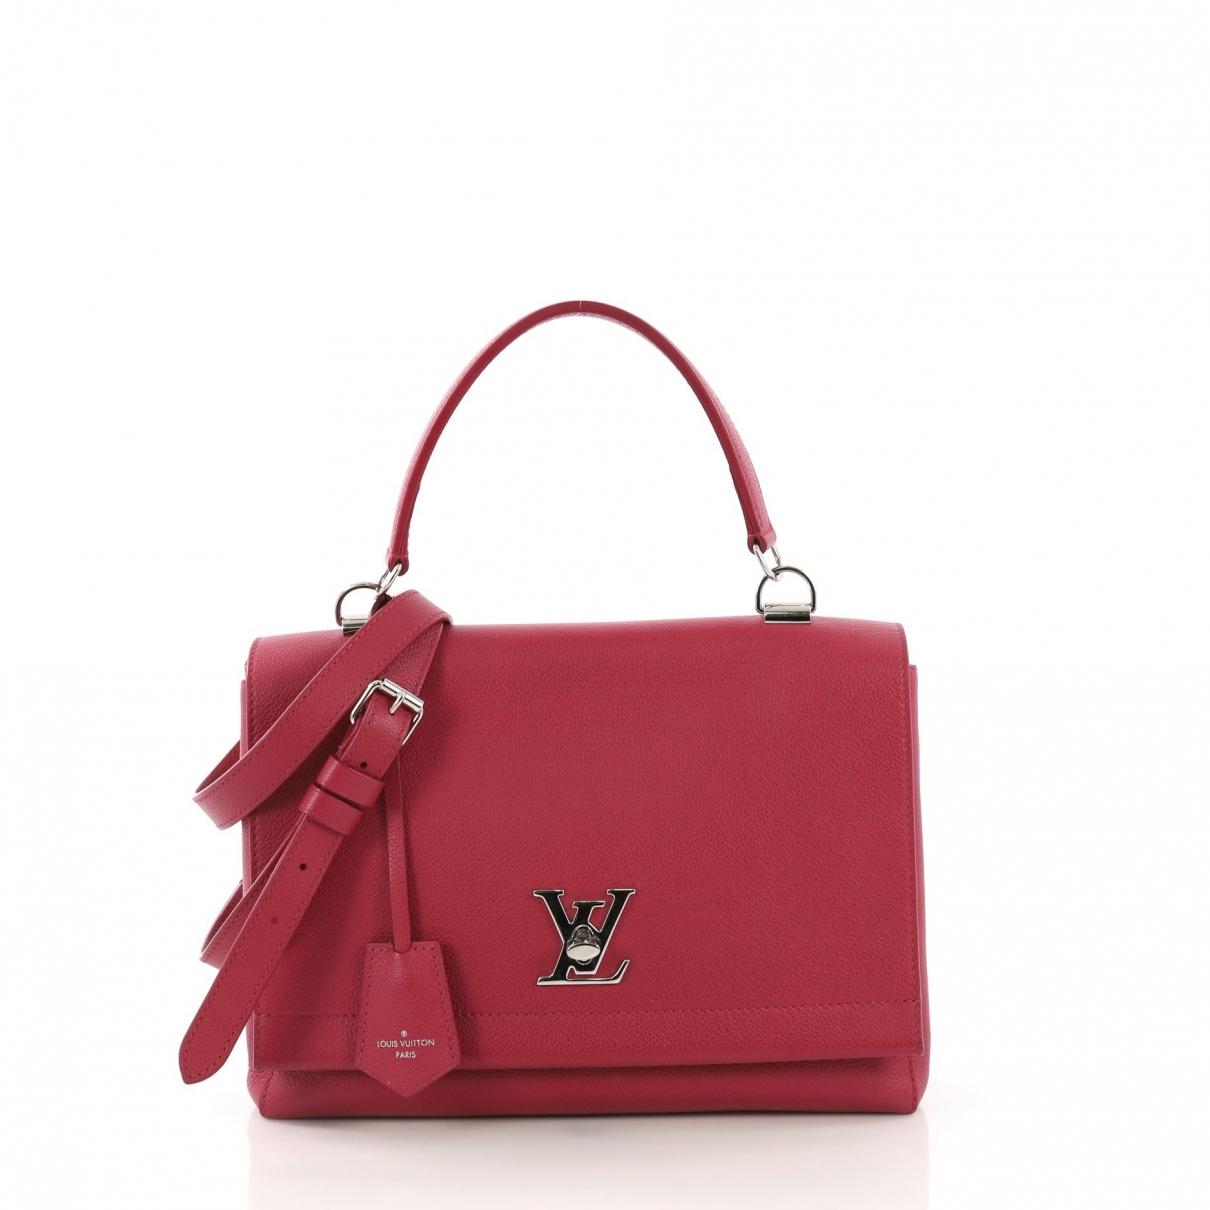 red Louis Vuitton Bags for Women - Vestiaire Collective